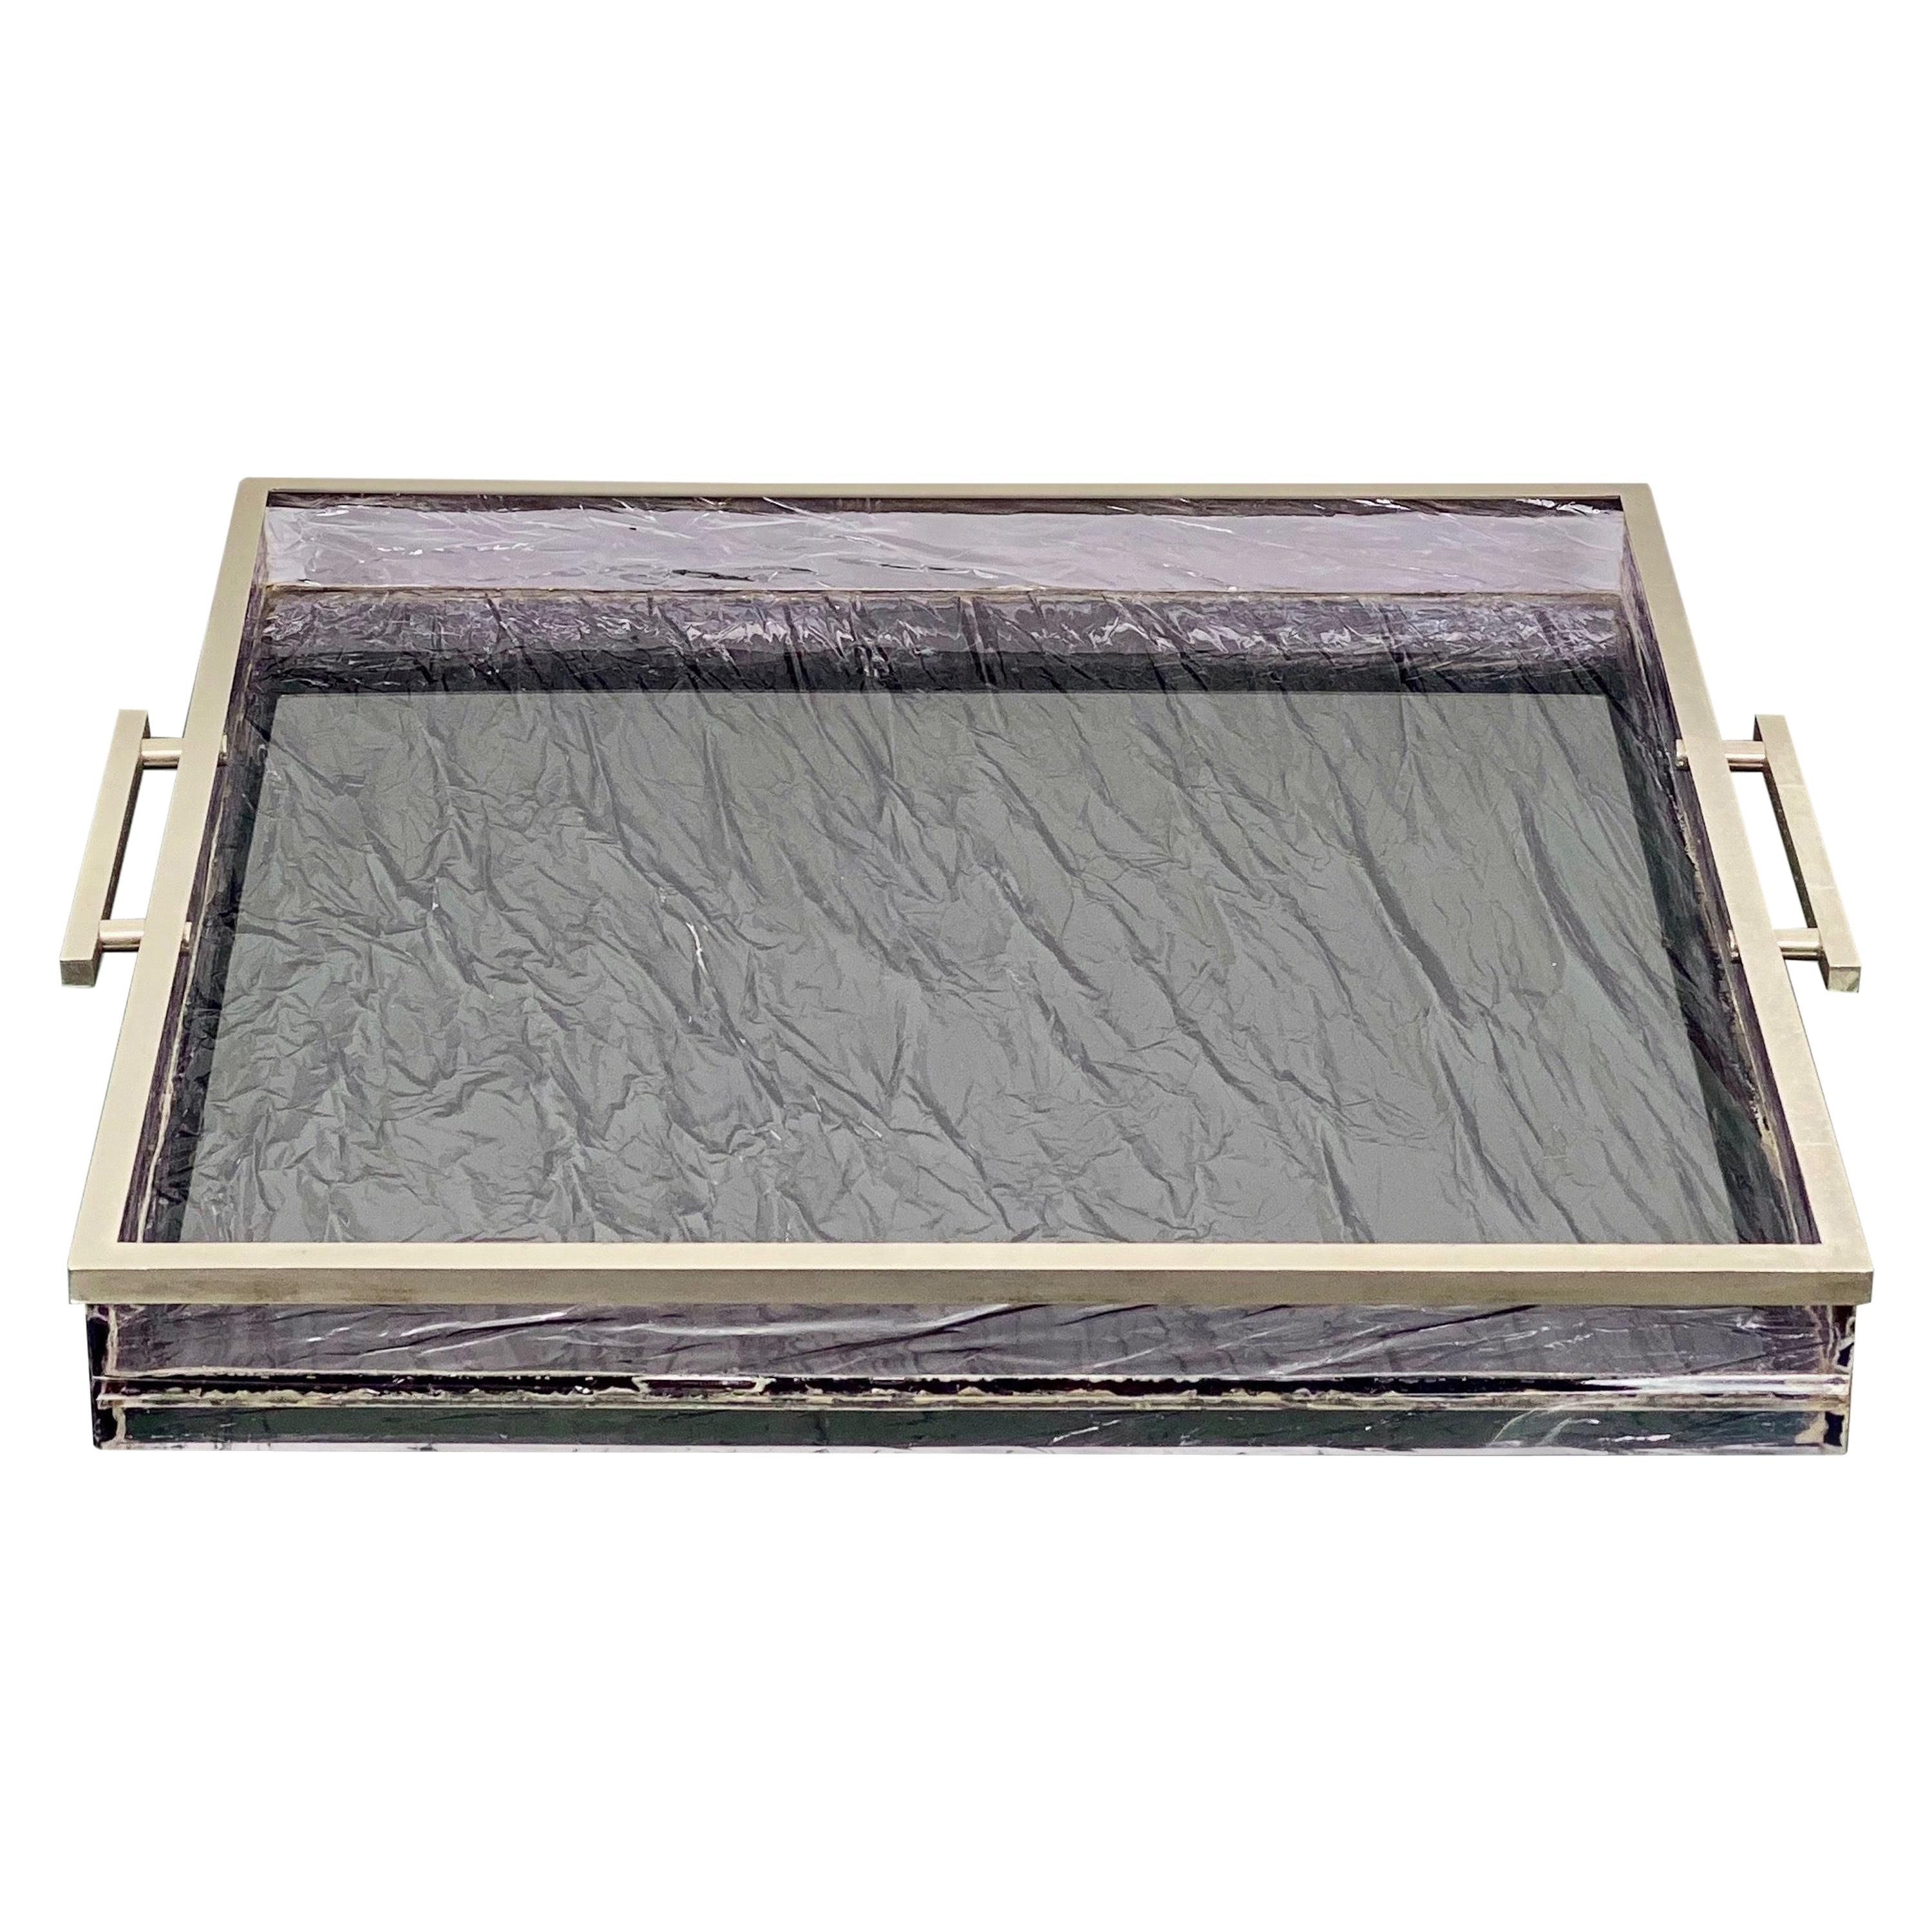 Ice Effect Tray Centrepiece, Lucite and Metal, Willy Rizzo Style, Italy, 1970s For Sale